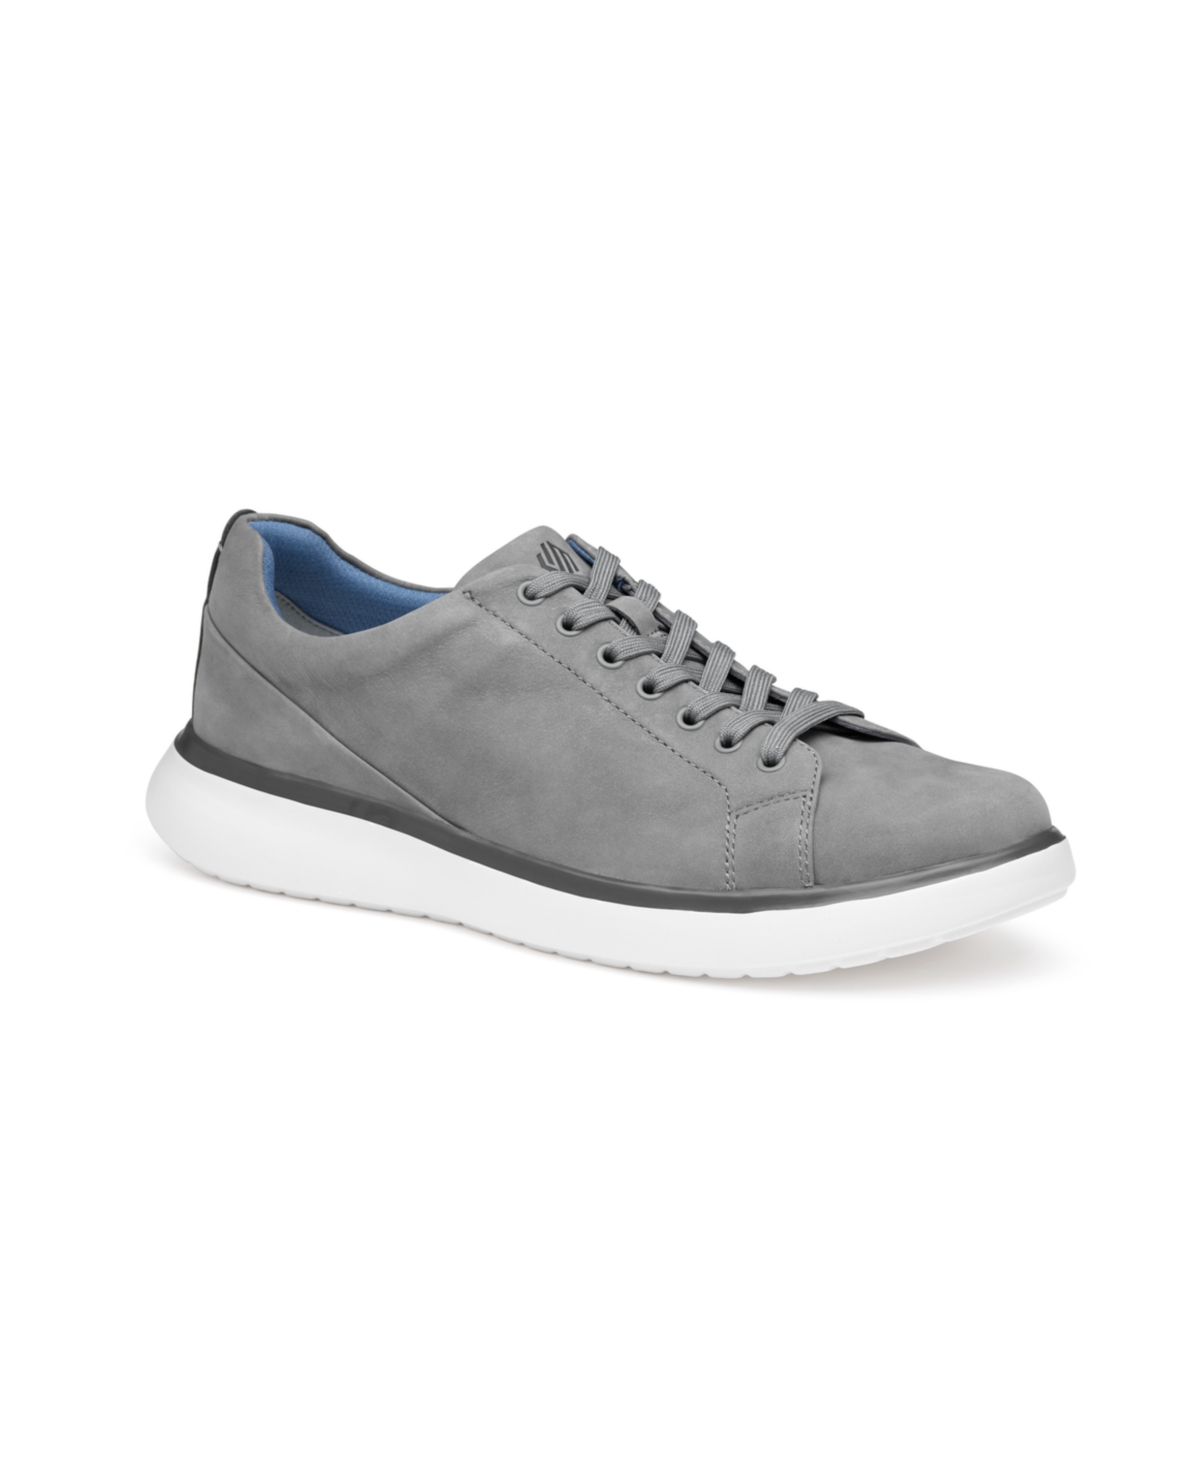 Men's Oasis Lace-To-Toe Sneakers - Gray